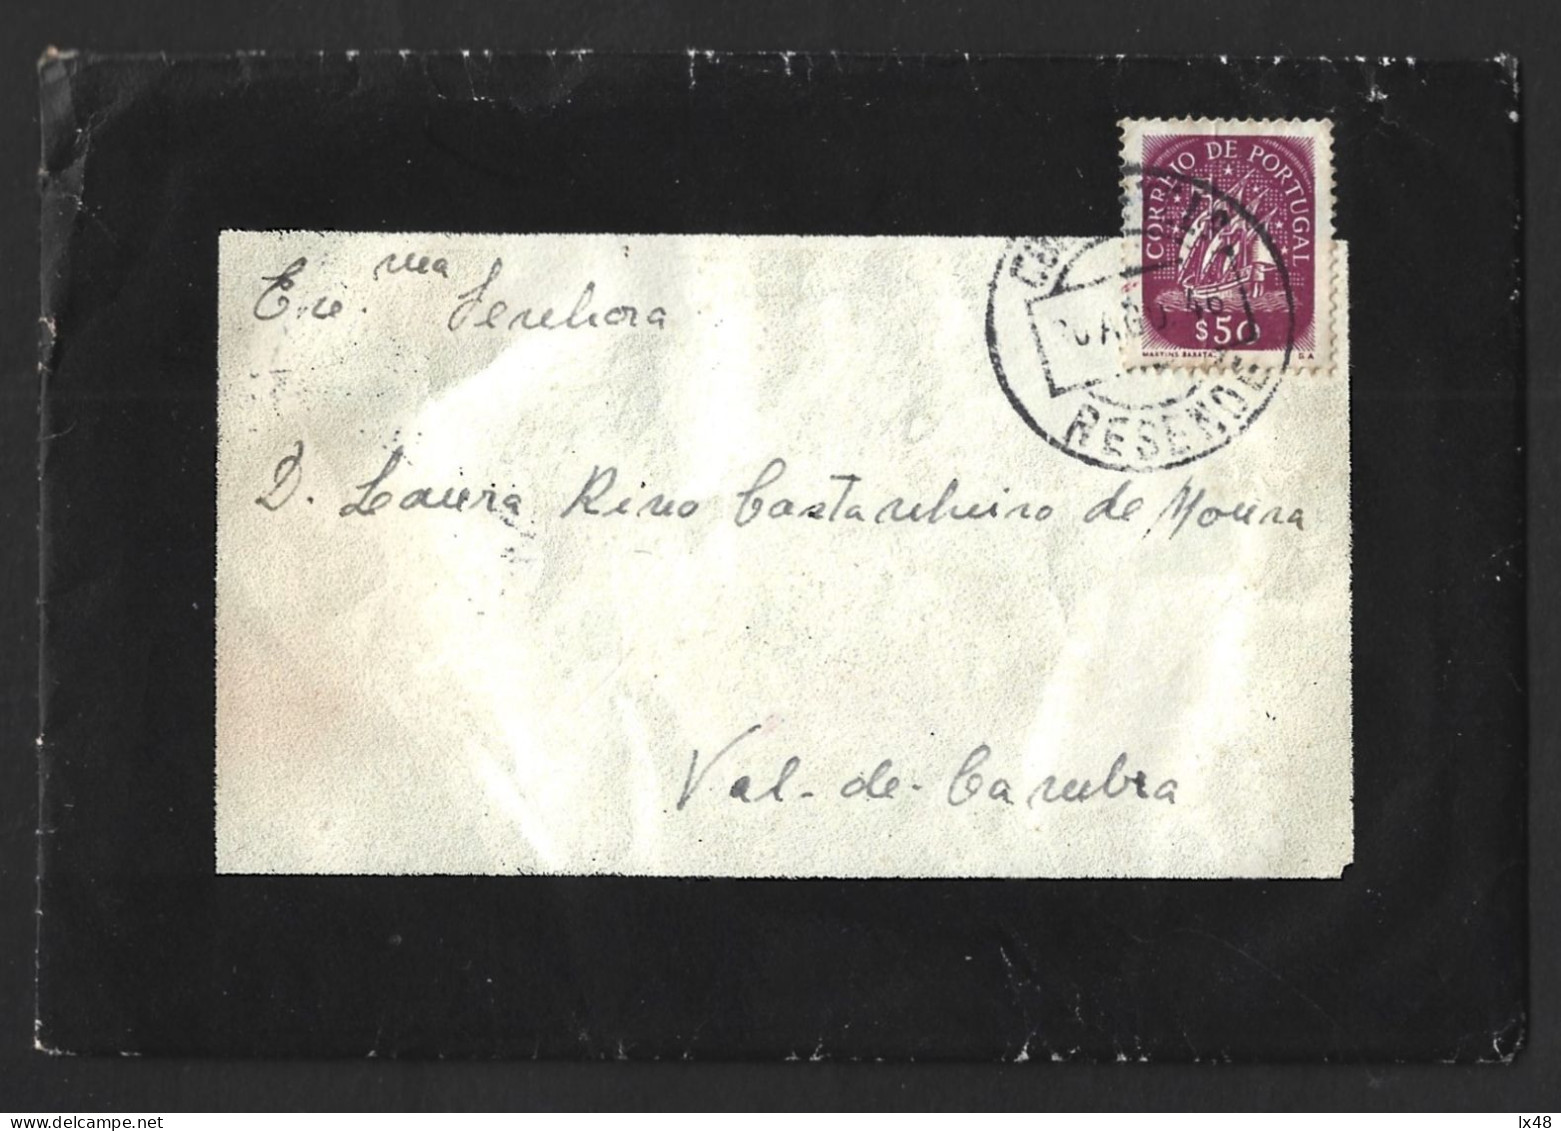 Carta De Luto Circulada De Resende Em 1946. Stamp Caravela.  Mourning Letter Circulated From Resende In 1946. Stamp Cara - Lettres & Documents